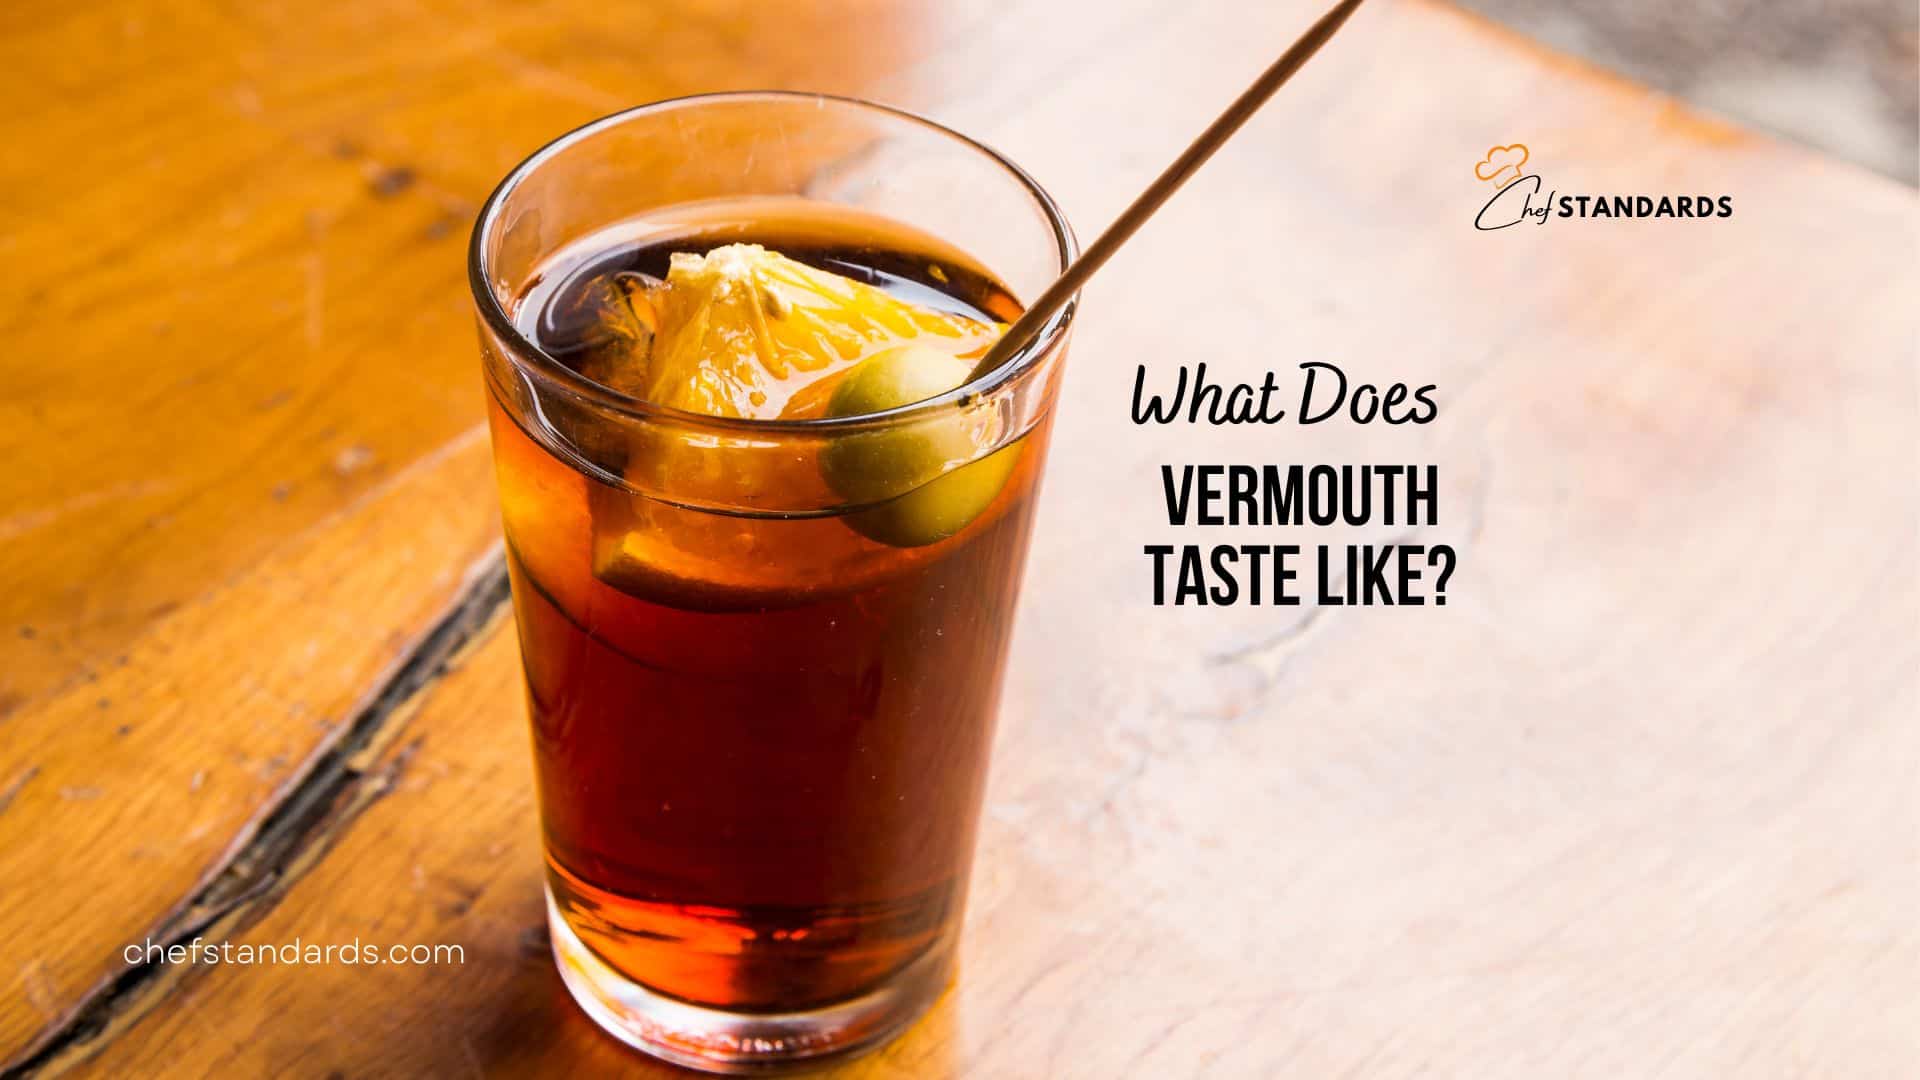 Vermouth in a glass with lemon